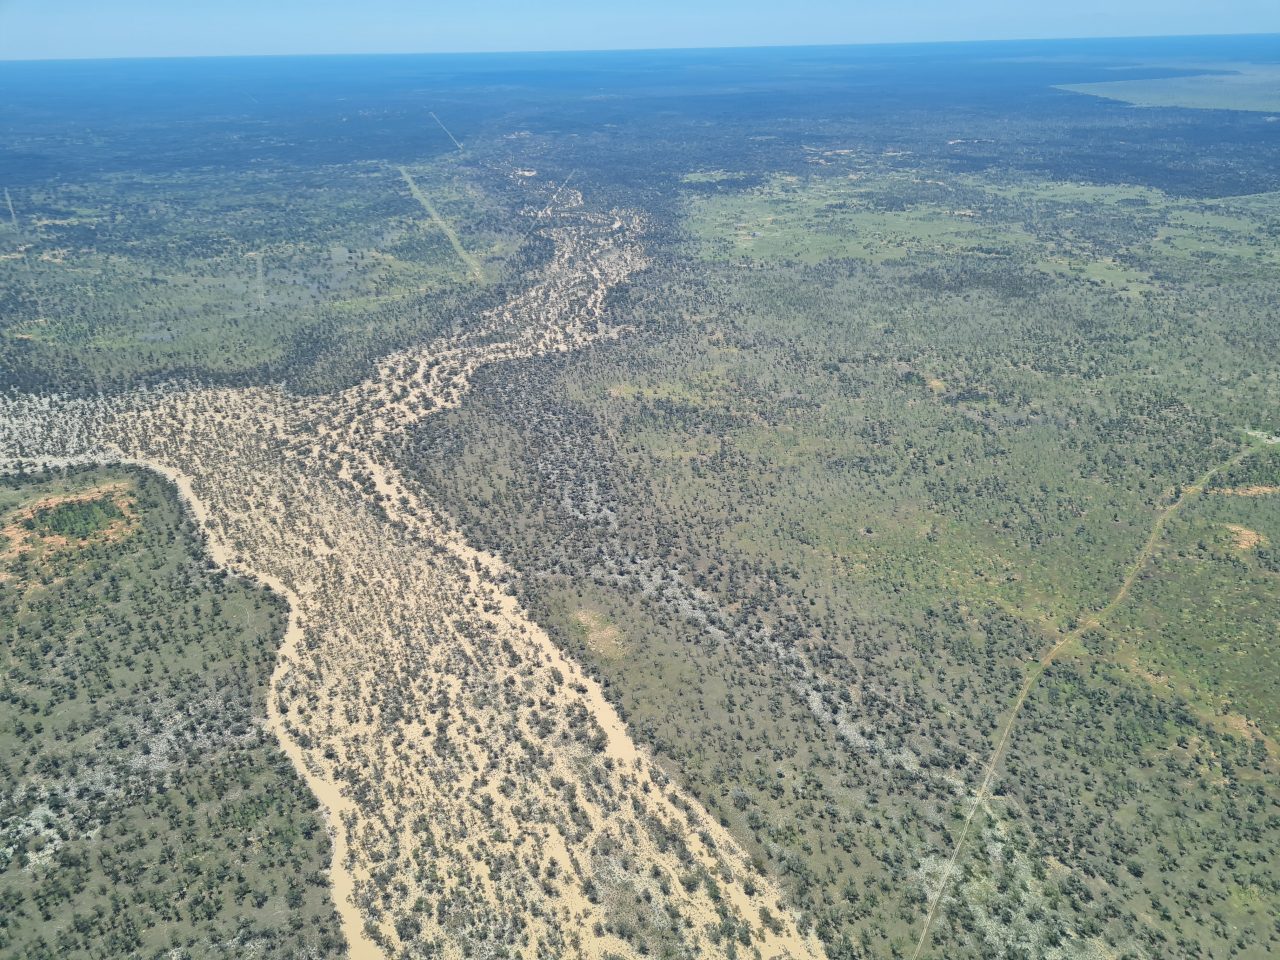 Aerial photo of a large flooded creek bifurcating and continuing to flow across the landscape. The water is light brown and is spreading through trees that are growing along the creek bed. The surrounding landscape is green and vegetated